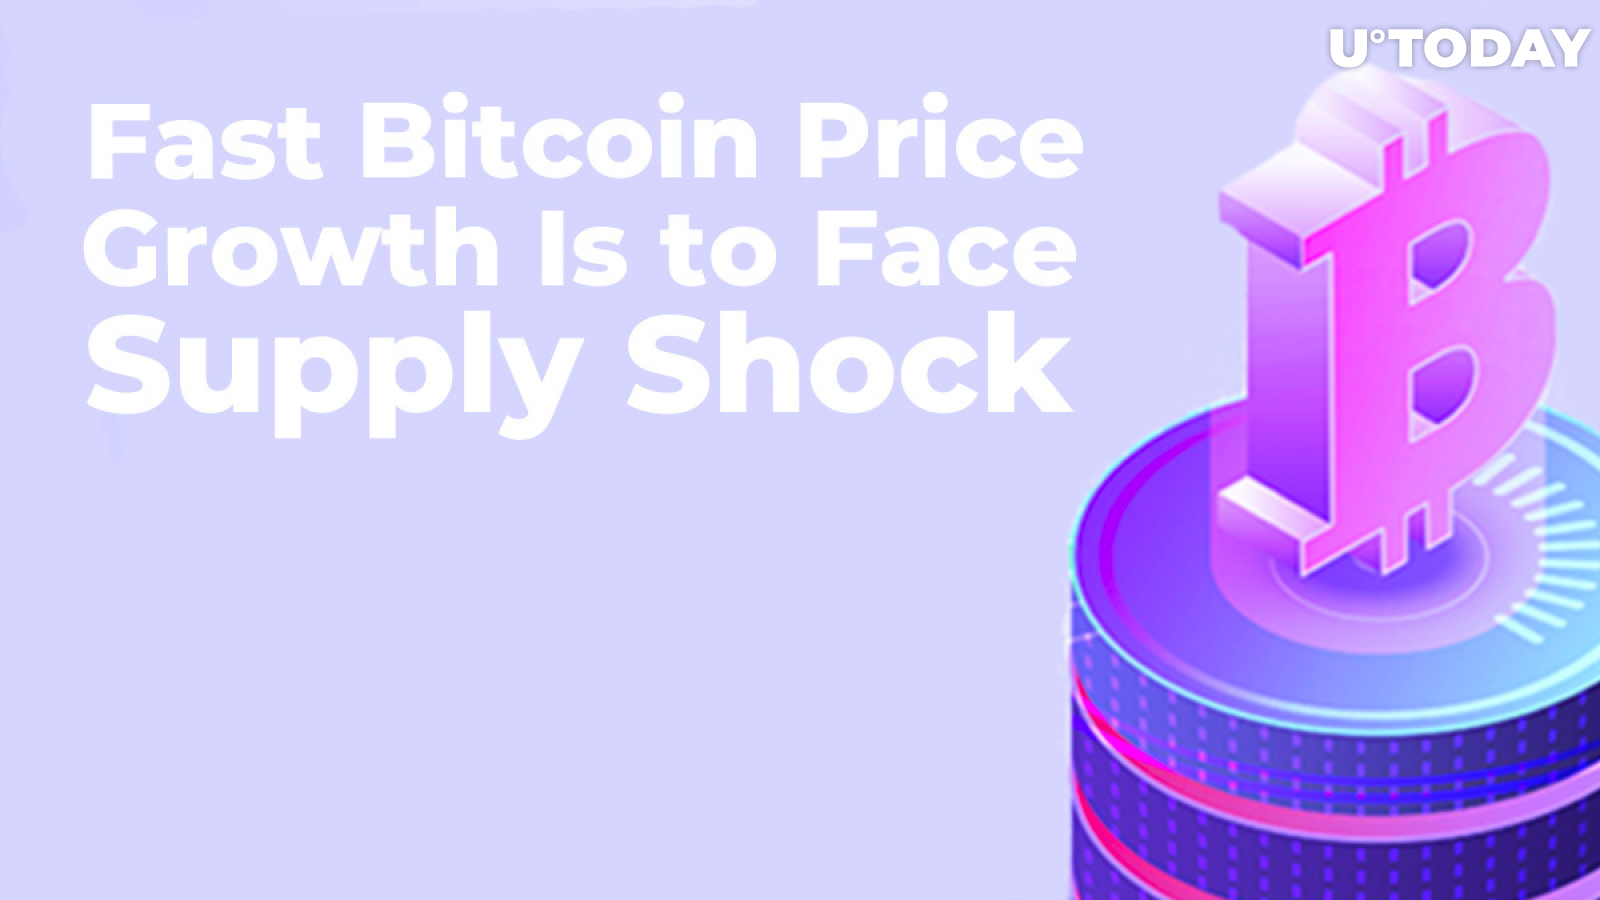 Fast Bitcoin Price Growth Is to Face ‘Supply Shock’, Says VC